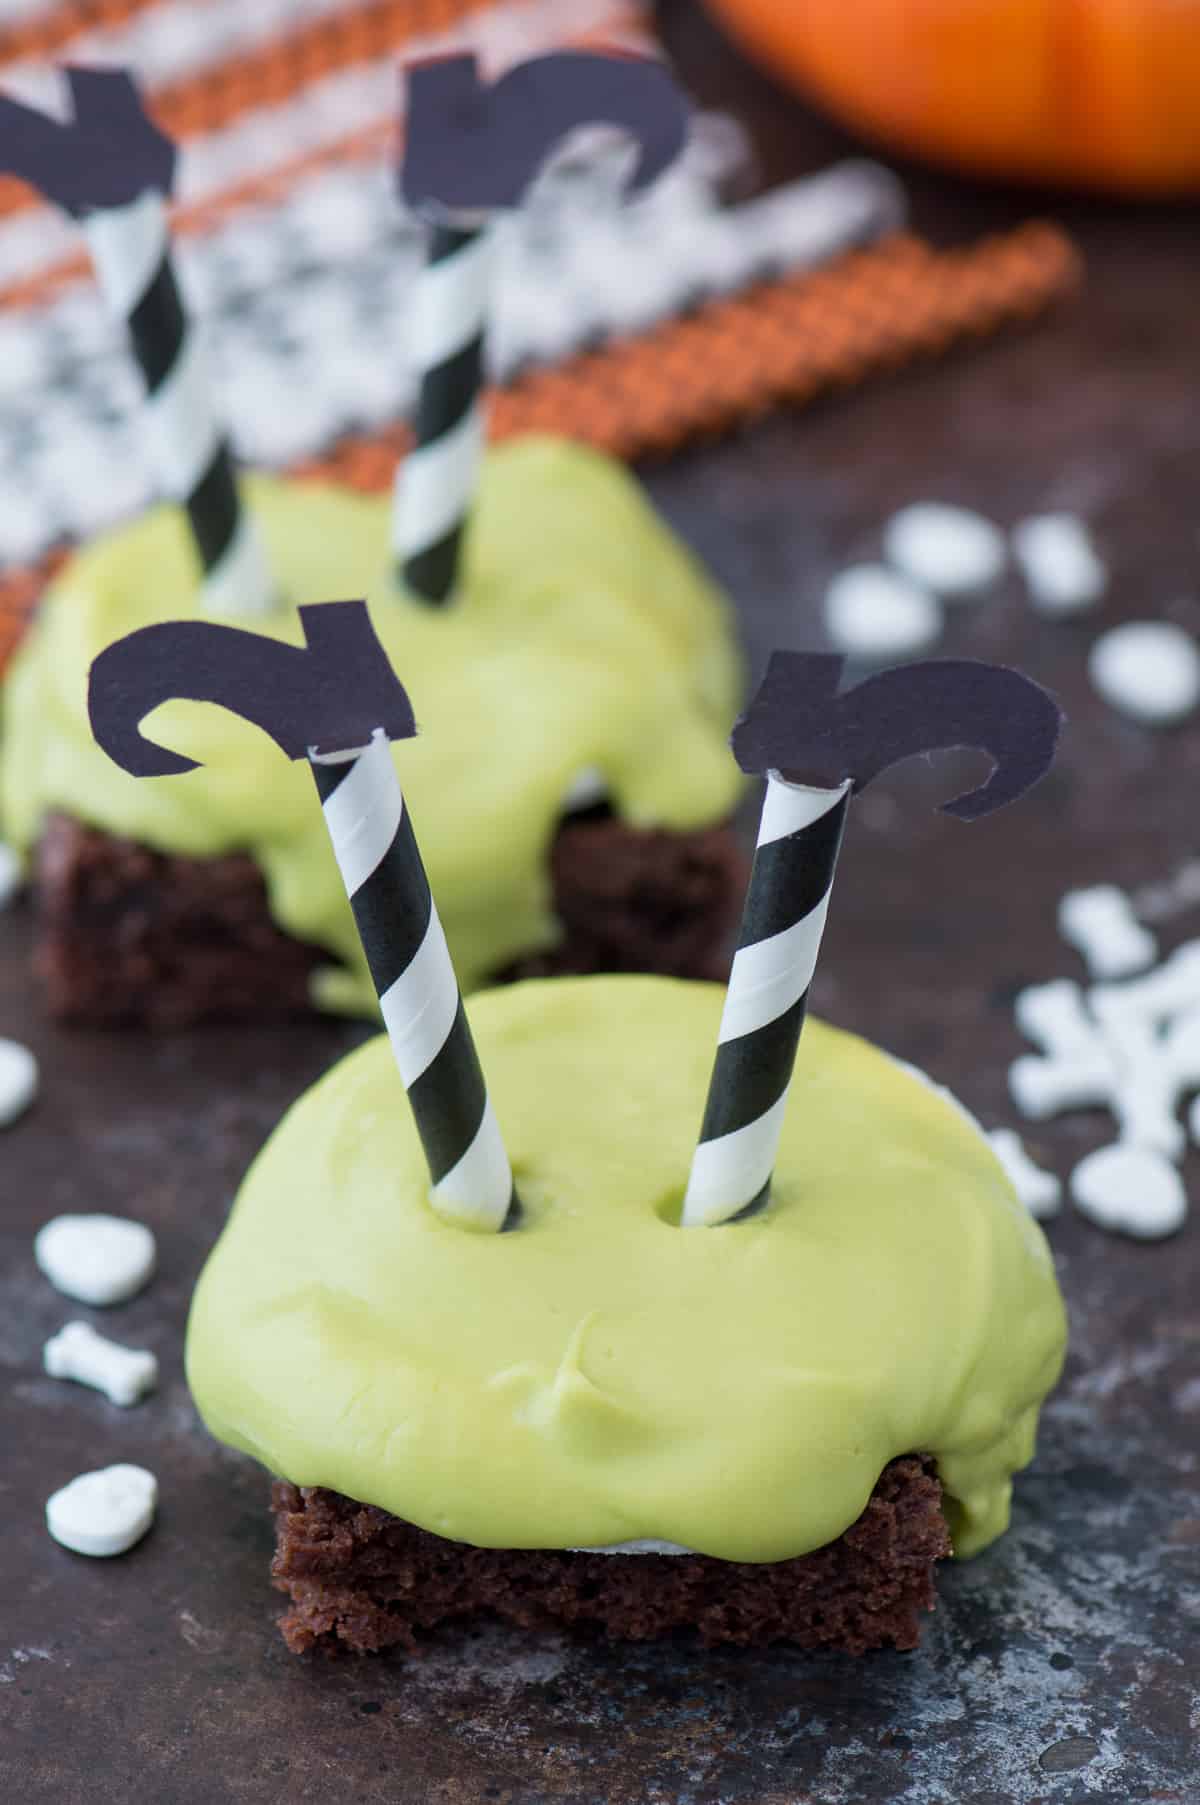 brownie square with green chocolate dripping over the side with striped witch's legs with black shoes stuck upside down in the chocolate